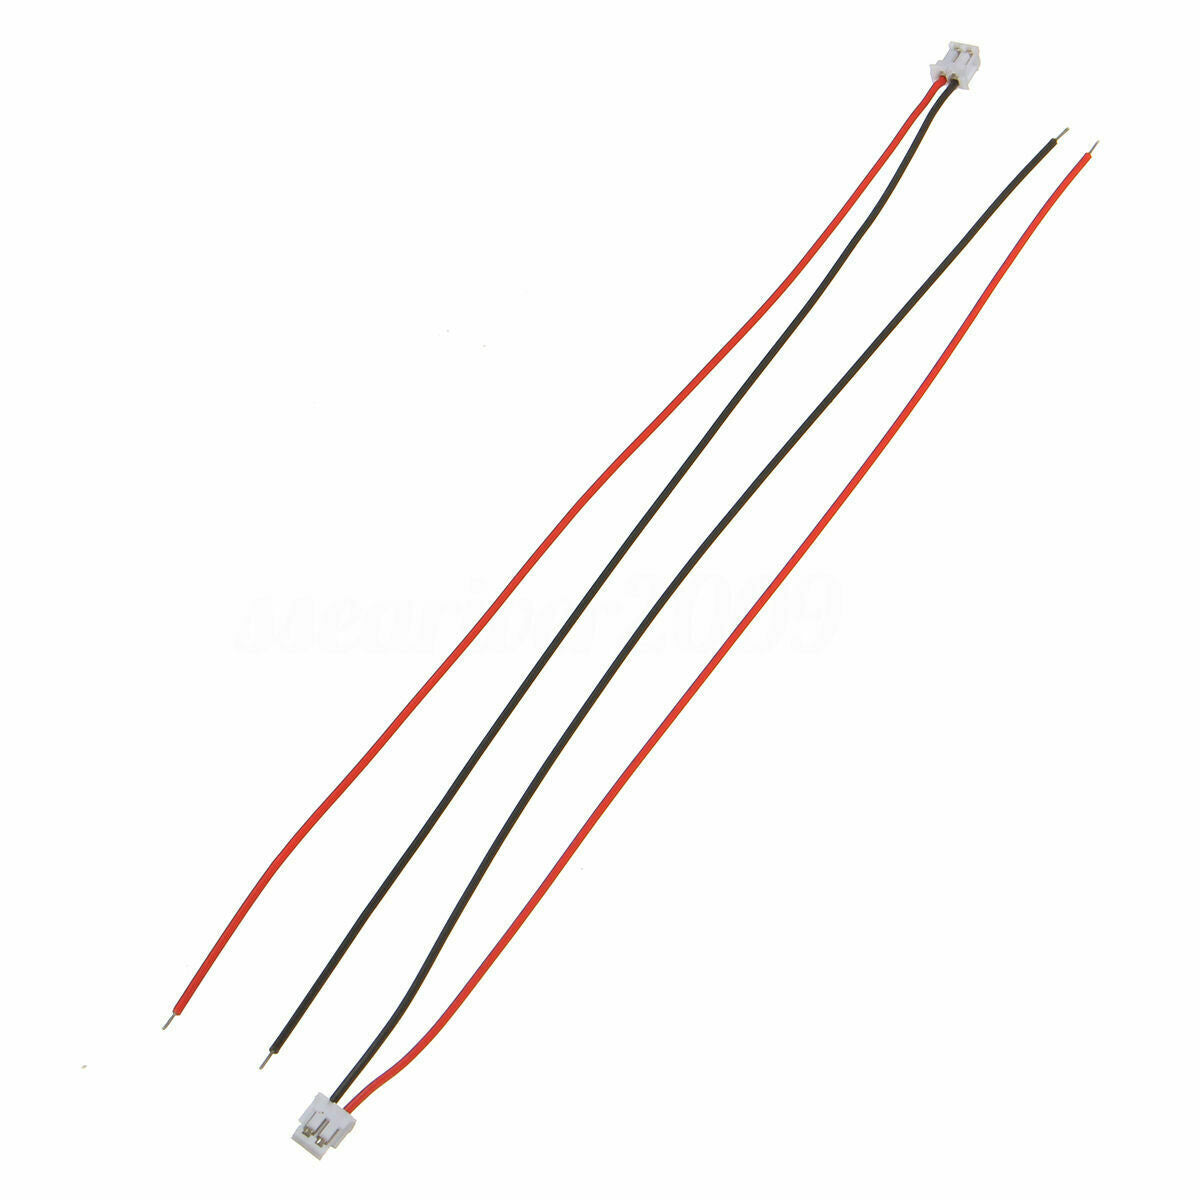 Micro JST 1.25mm 2-Pin Female Battery Connector 10cm wire (10 sets)